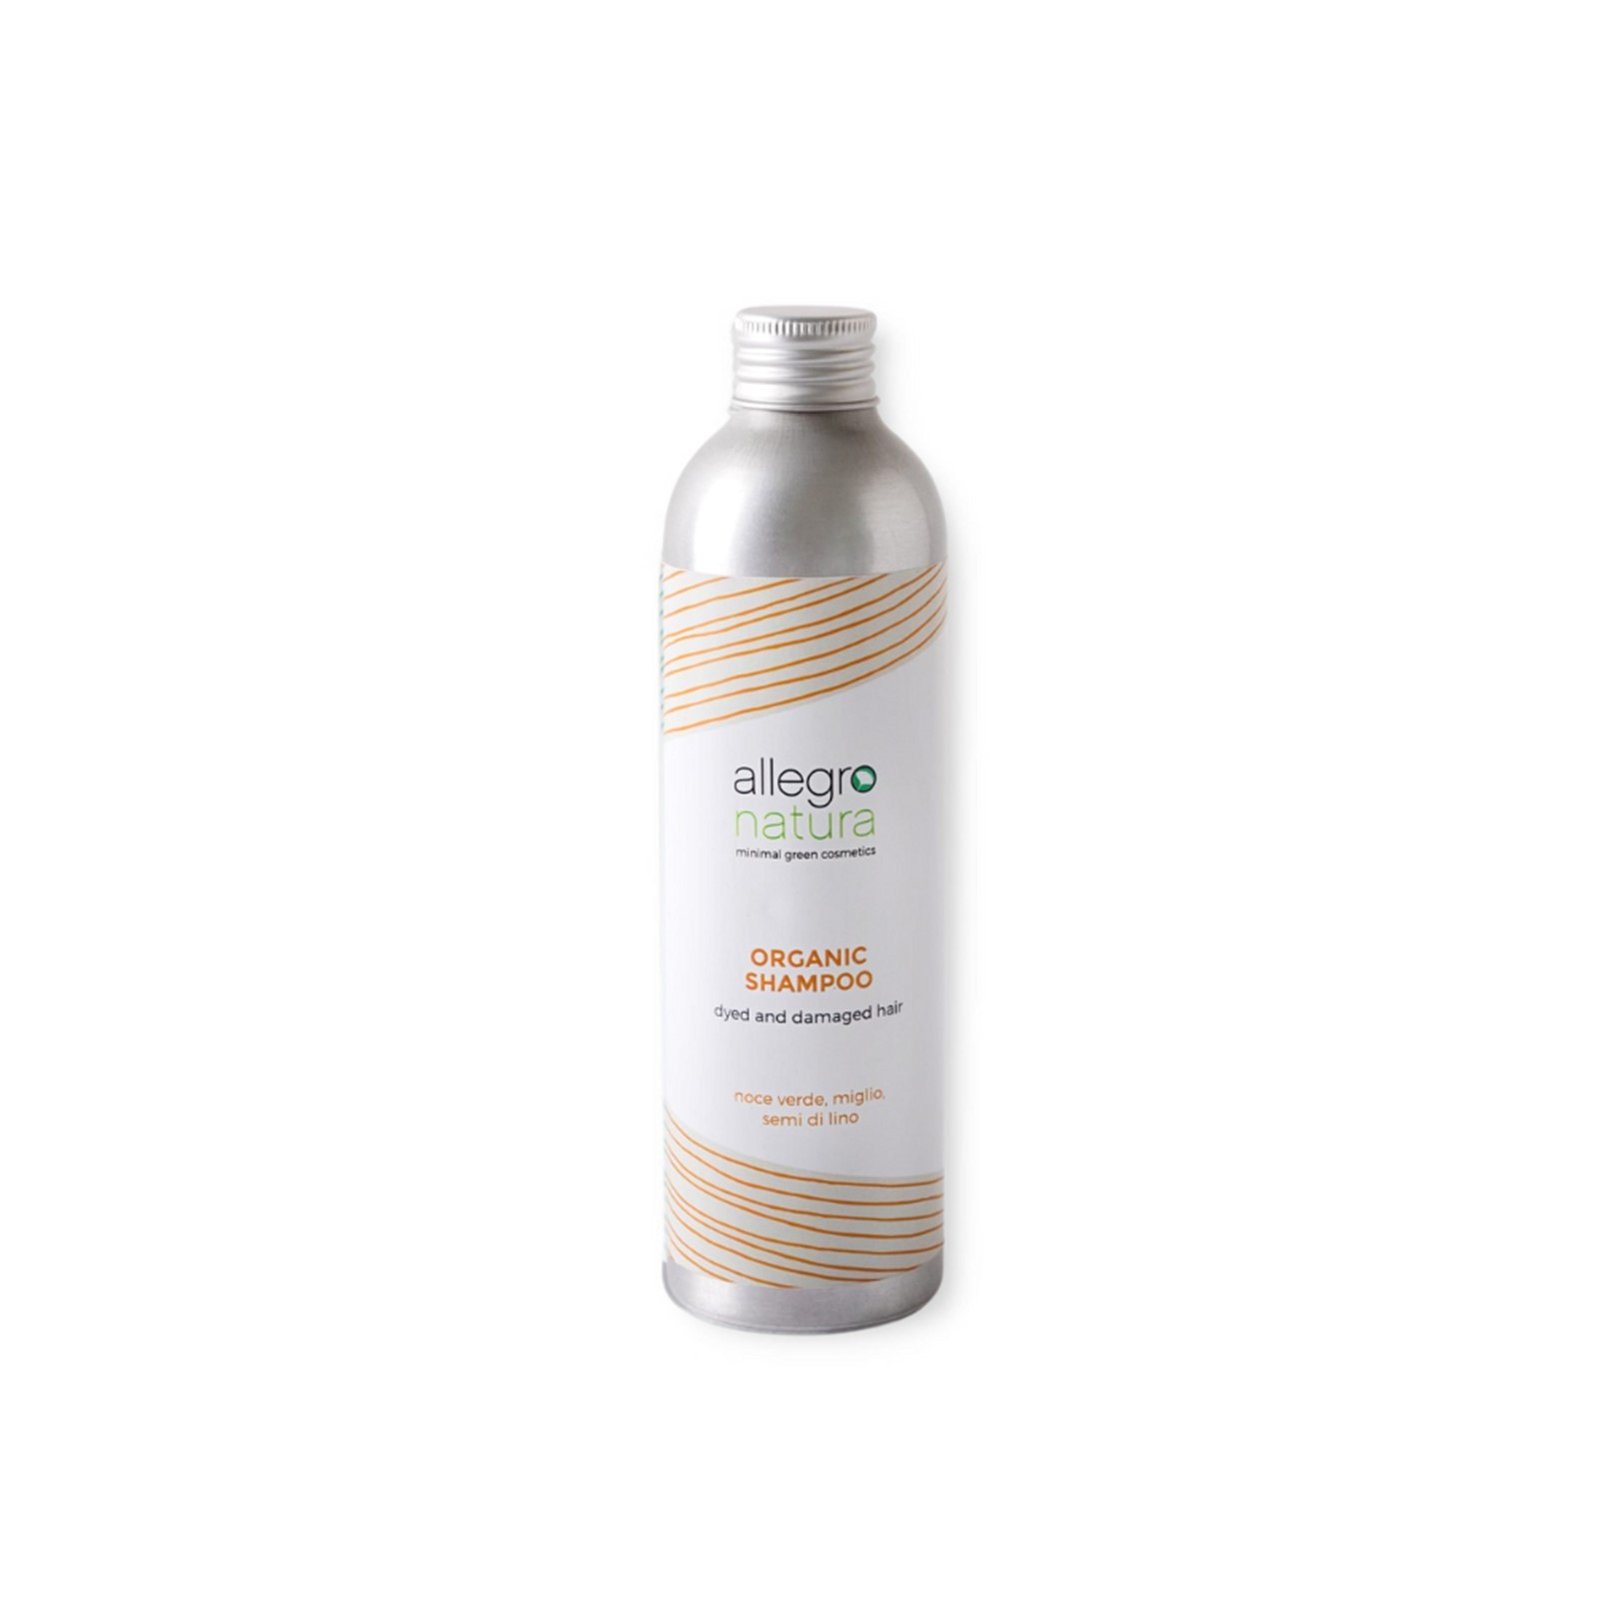 Allegro Natura Organic Shampoo For Dyed And Damaged Hair 250ml